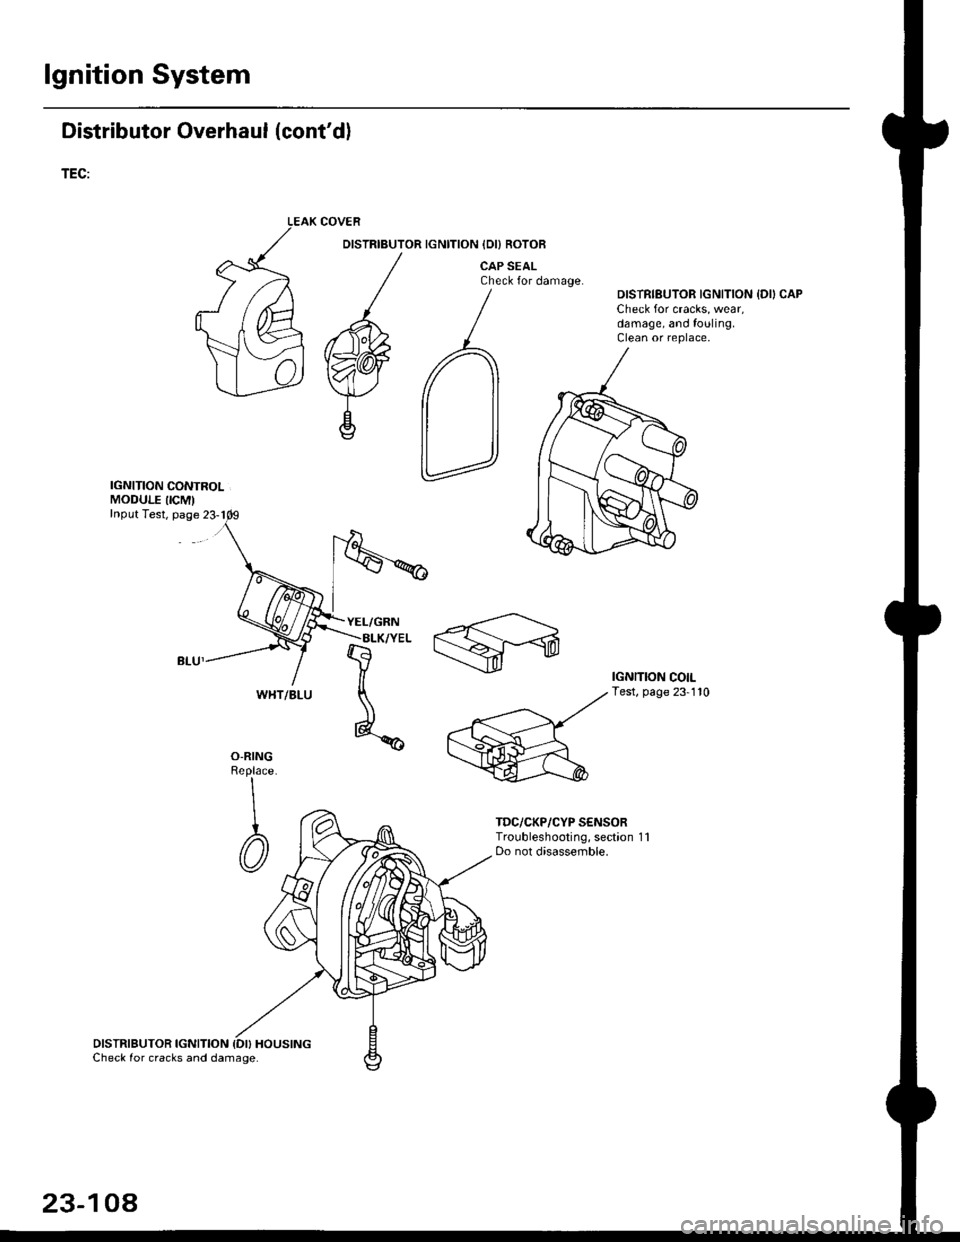 HONDA CIVIC 1998 6.G Owners Manual lgnition System
Distributor Overhaul (contdl
TEC:
IGNITION CONTROLMODULE IICMInput Test, page 23-1
DISTRIBUTOR IGNITION {DI} HOUSINGCheck for cracks and damage.
COVER
DISTRIBUTOR IGNITION IDI) ROTOB